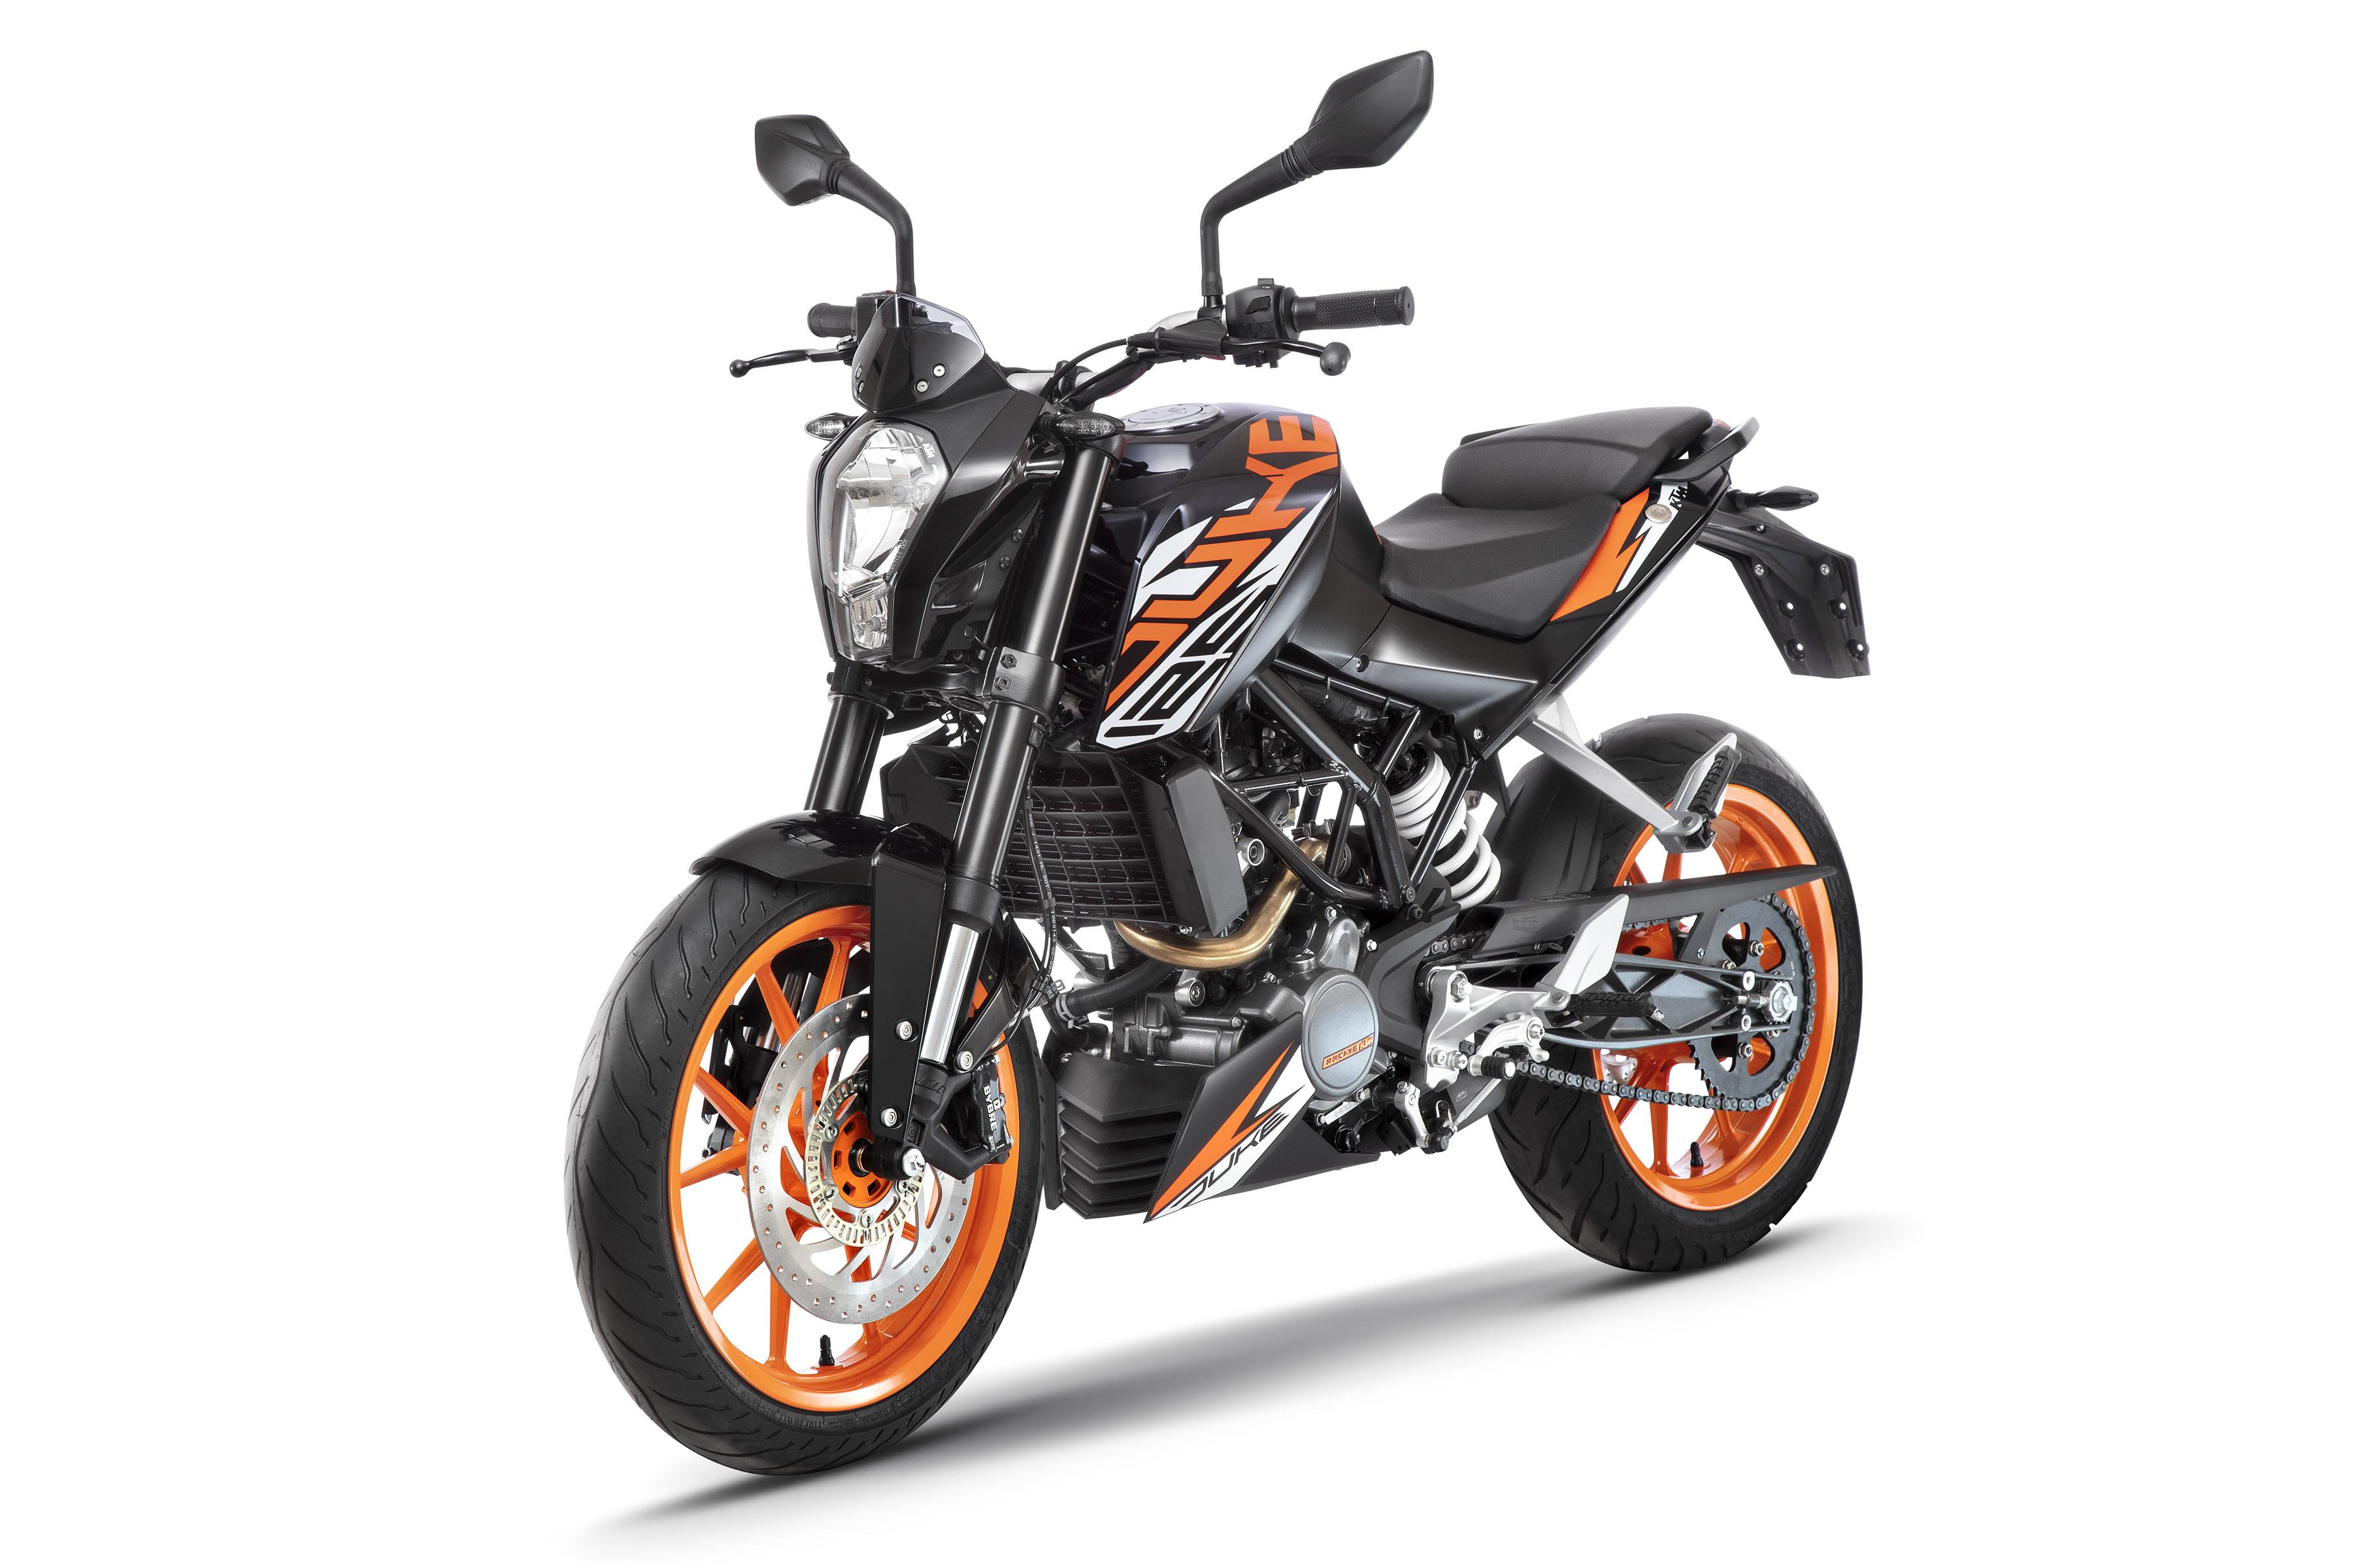 KTM Duke 125 India Launch, Price, Specifications and Features